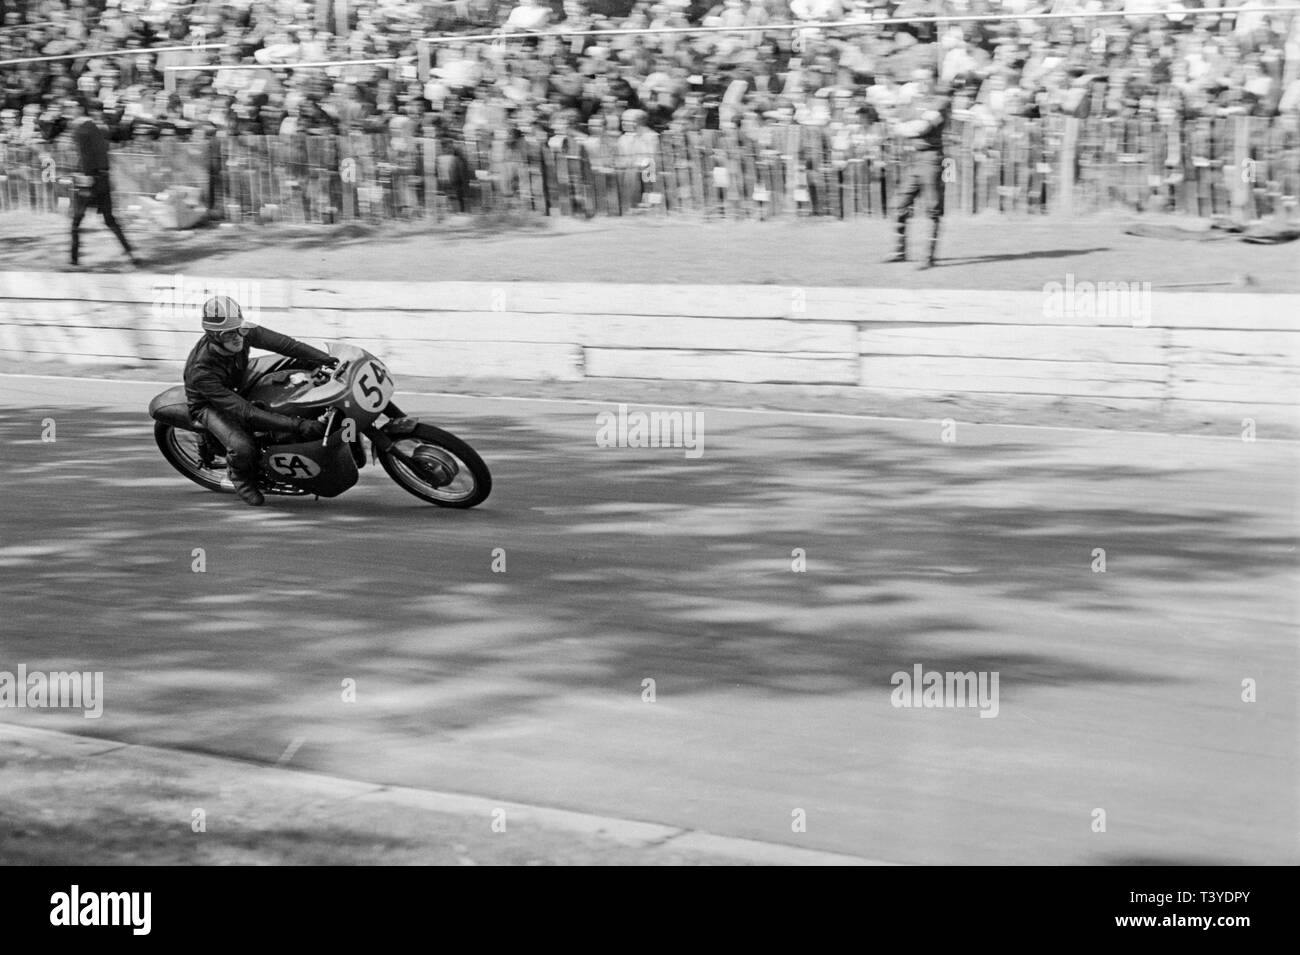 Motorcycle racing at Crystal Palace near London in 1968. A motorcycle racer, number 54, approaching in to a bend on the track. The Crystal Palace racing circuit was closed in 1972. Stock Photo